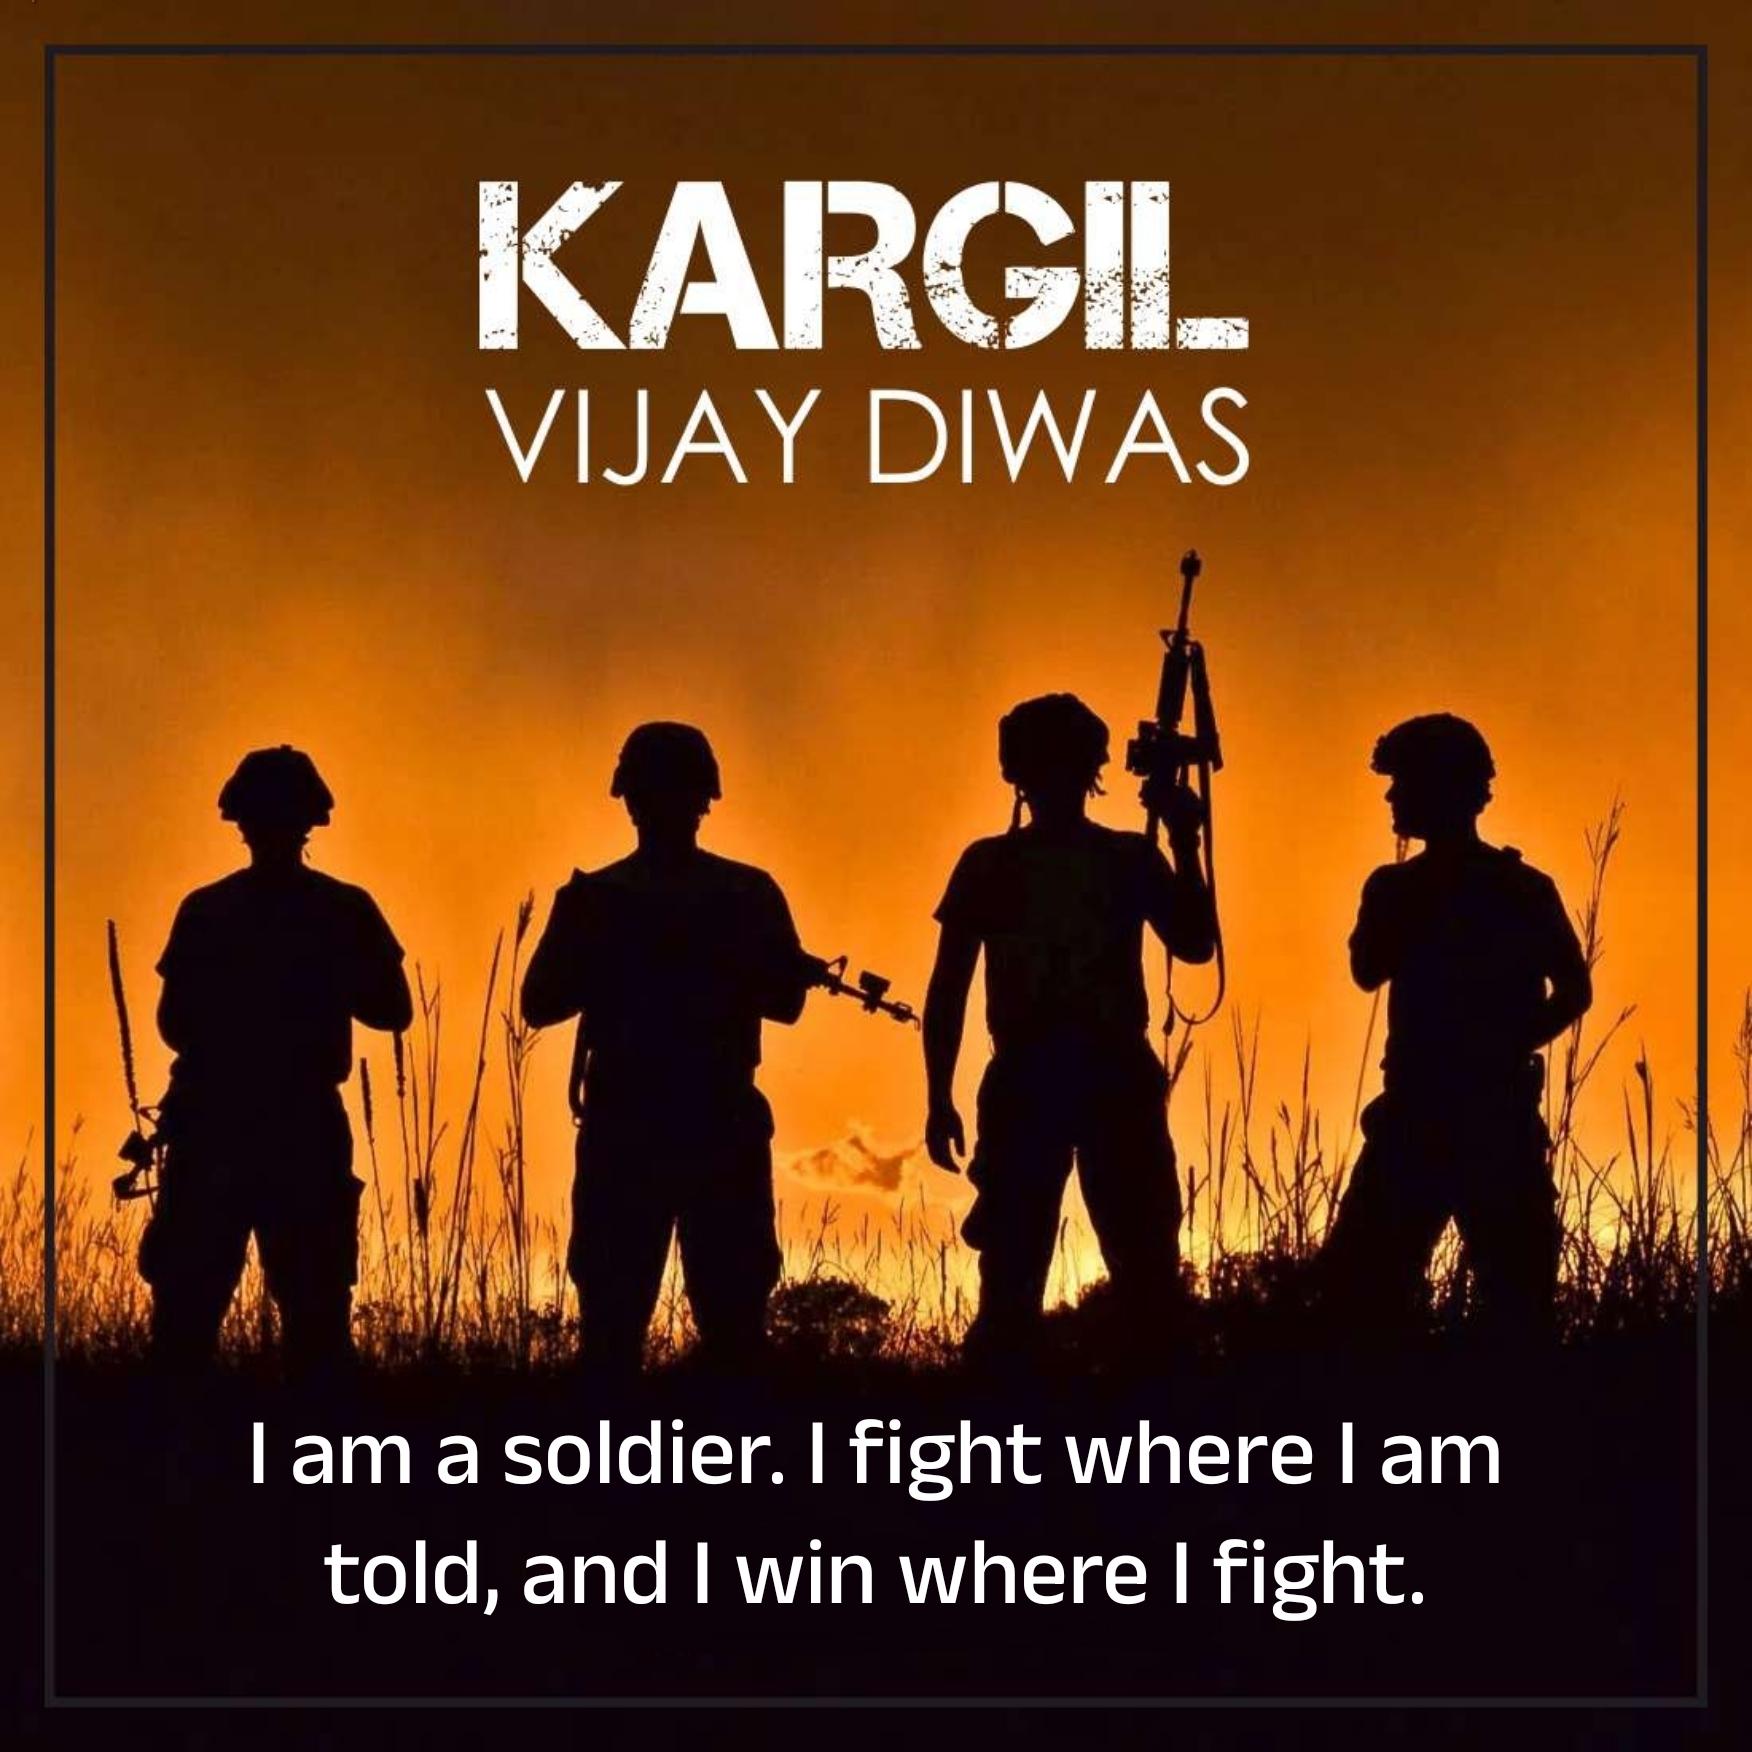 I am a soldier I fight where I am told and I win where I fight